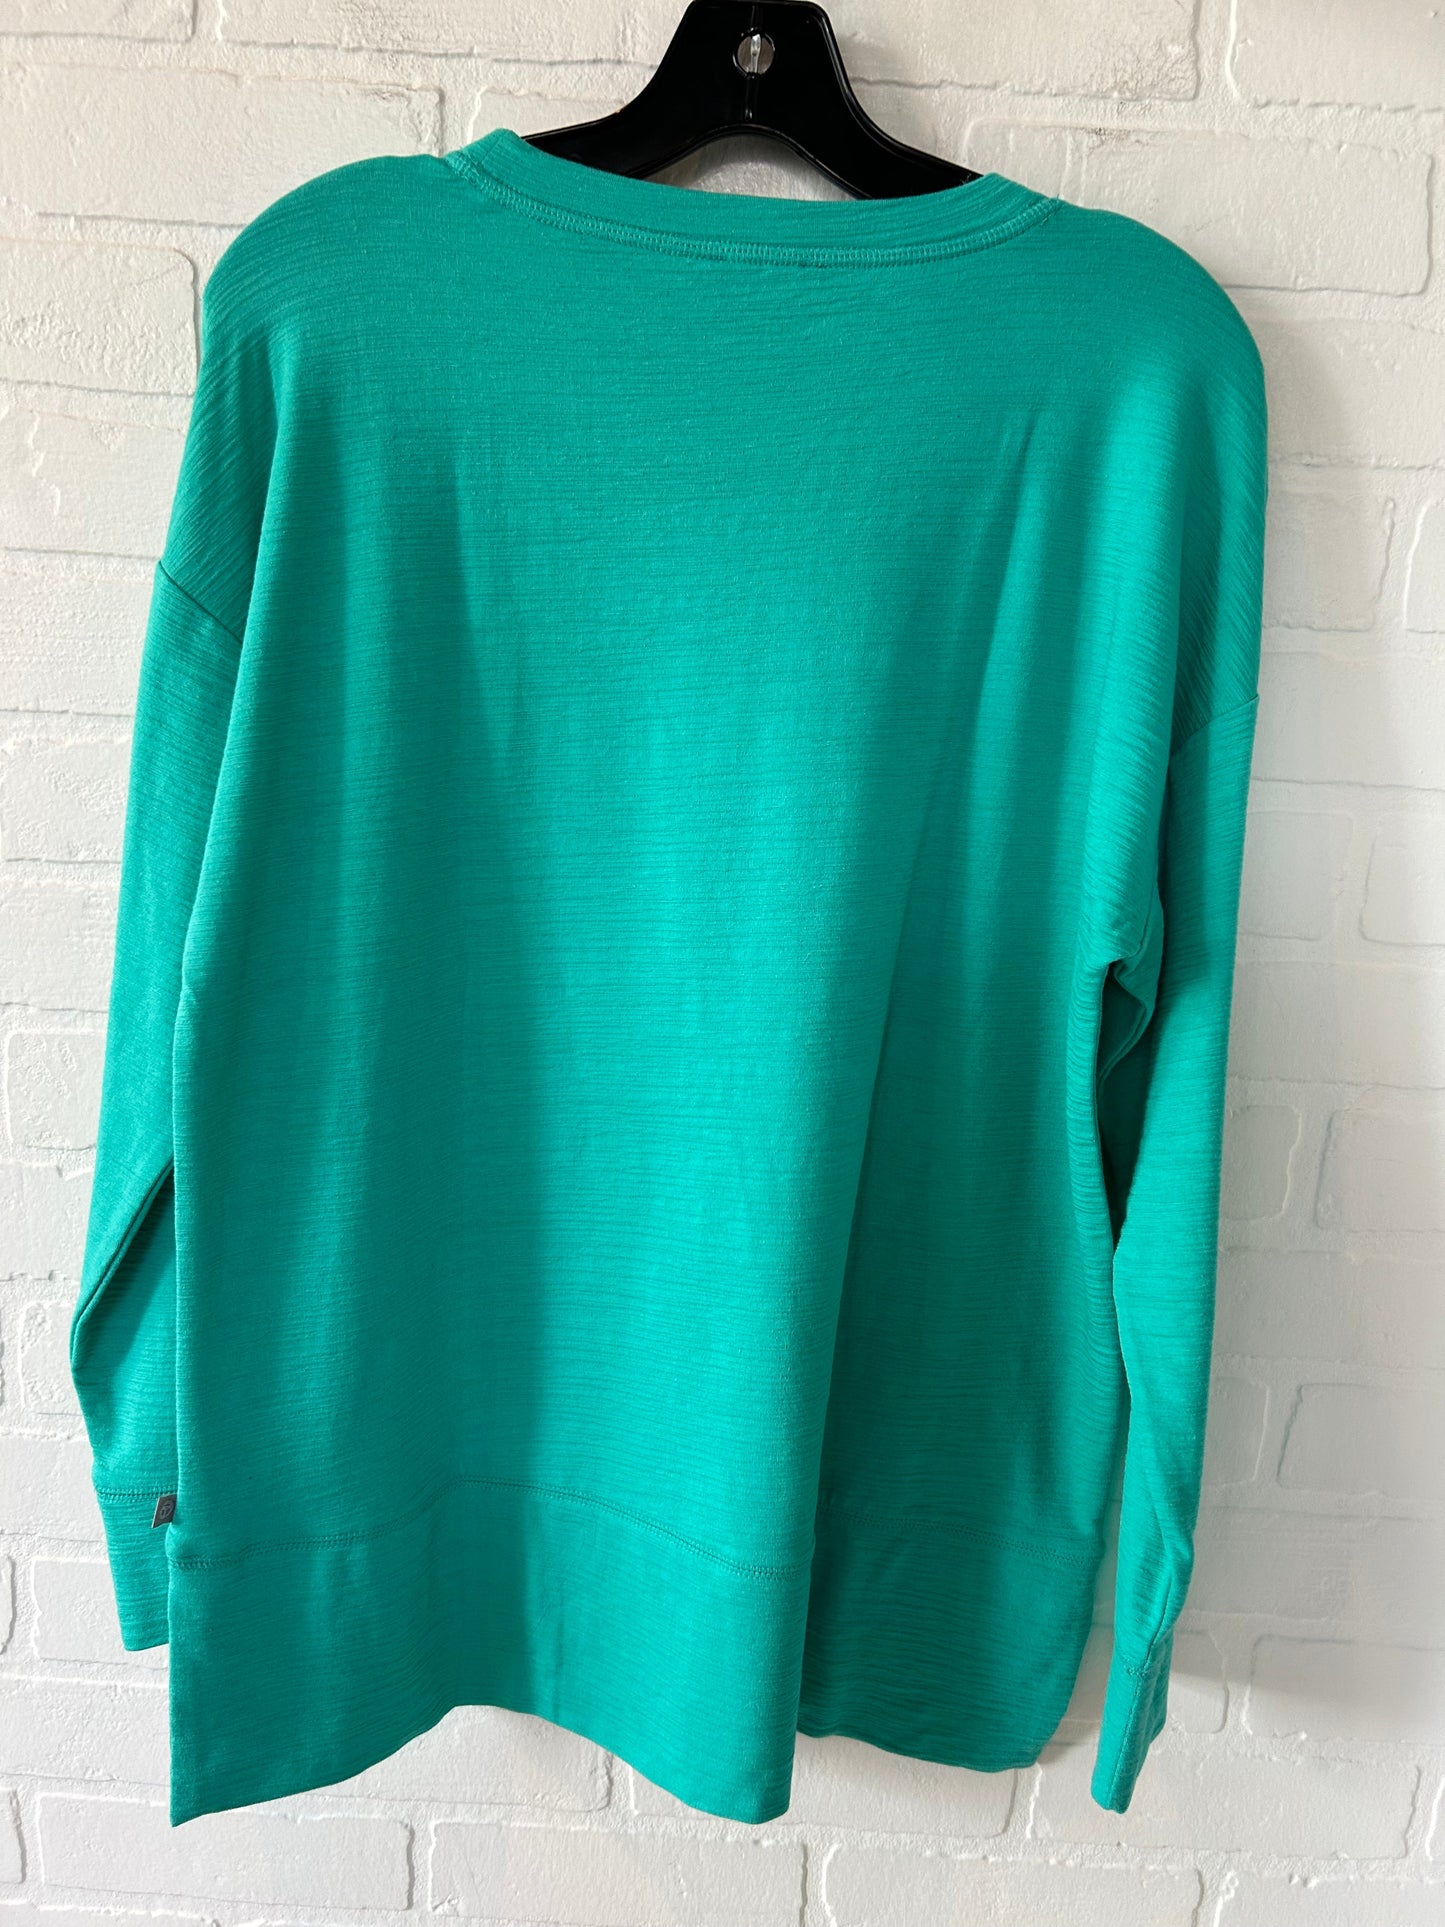 Green Top Long Sleeve Talbots, Size M